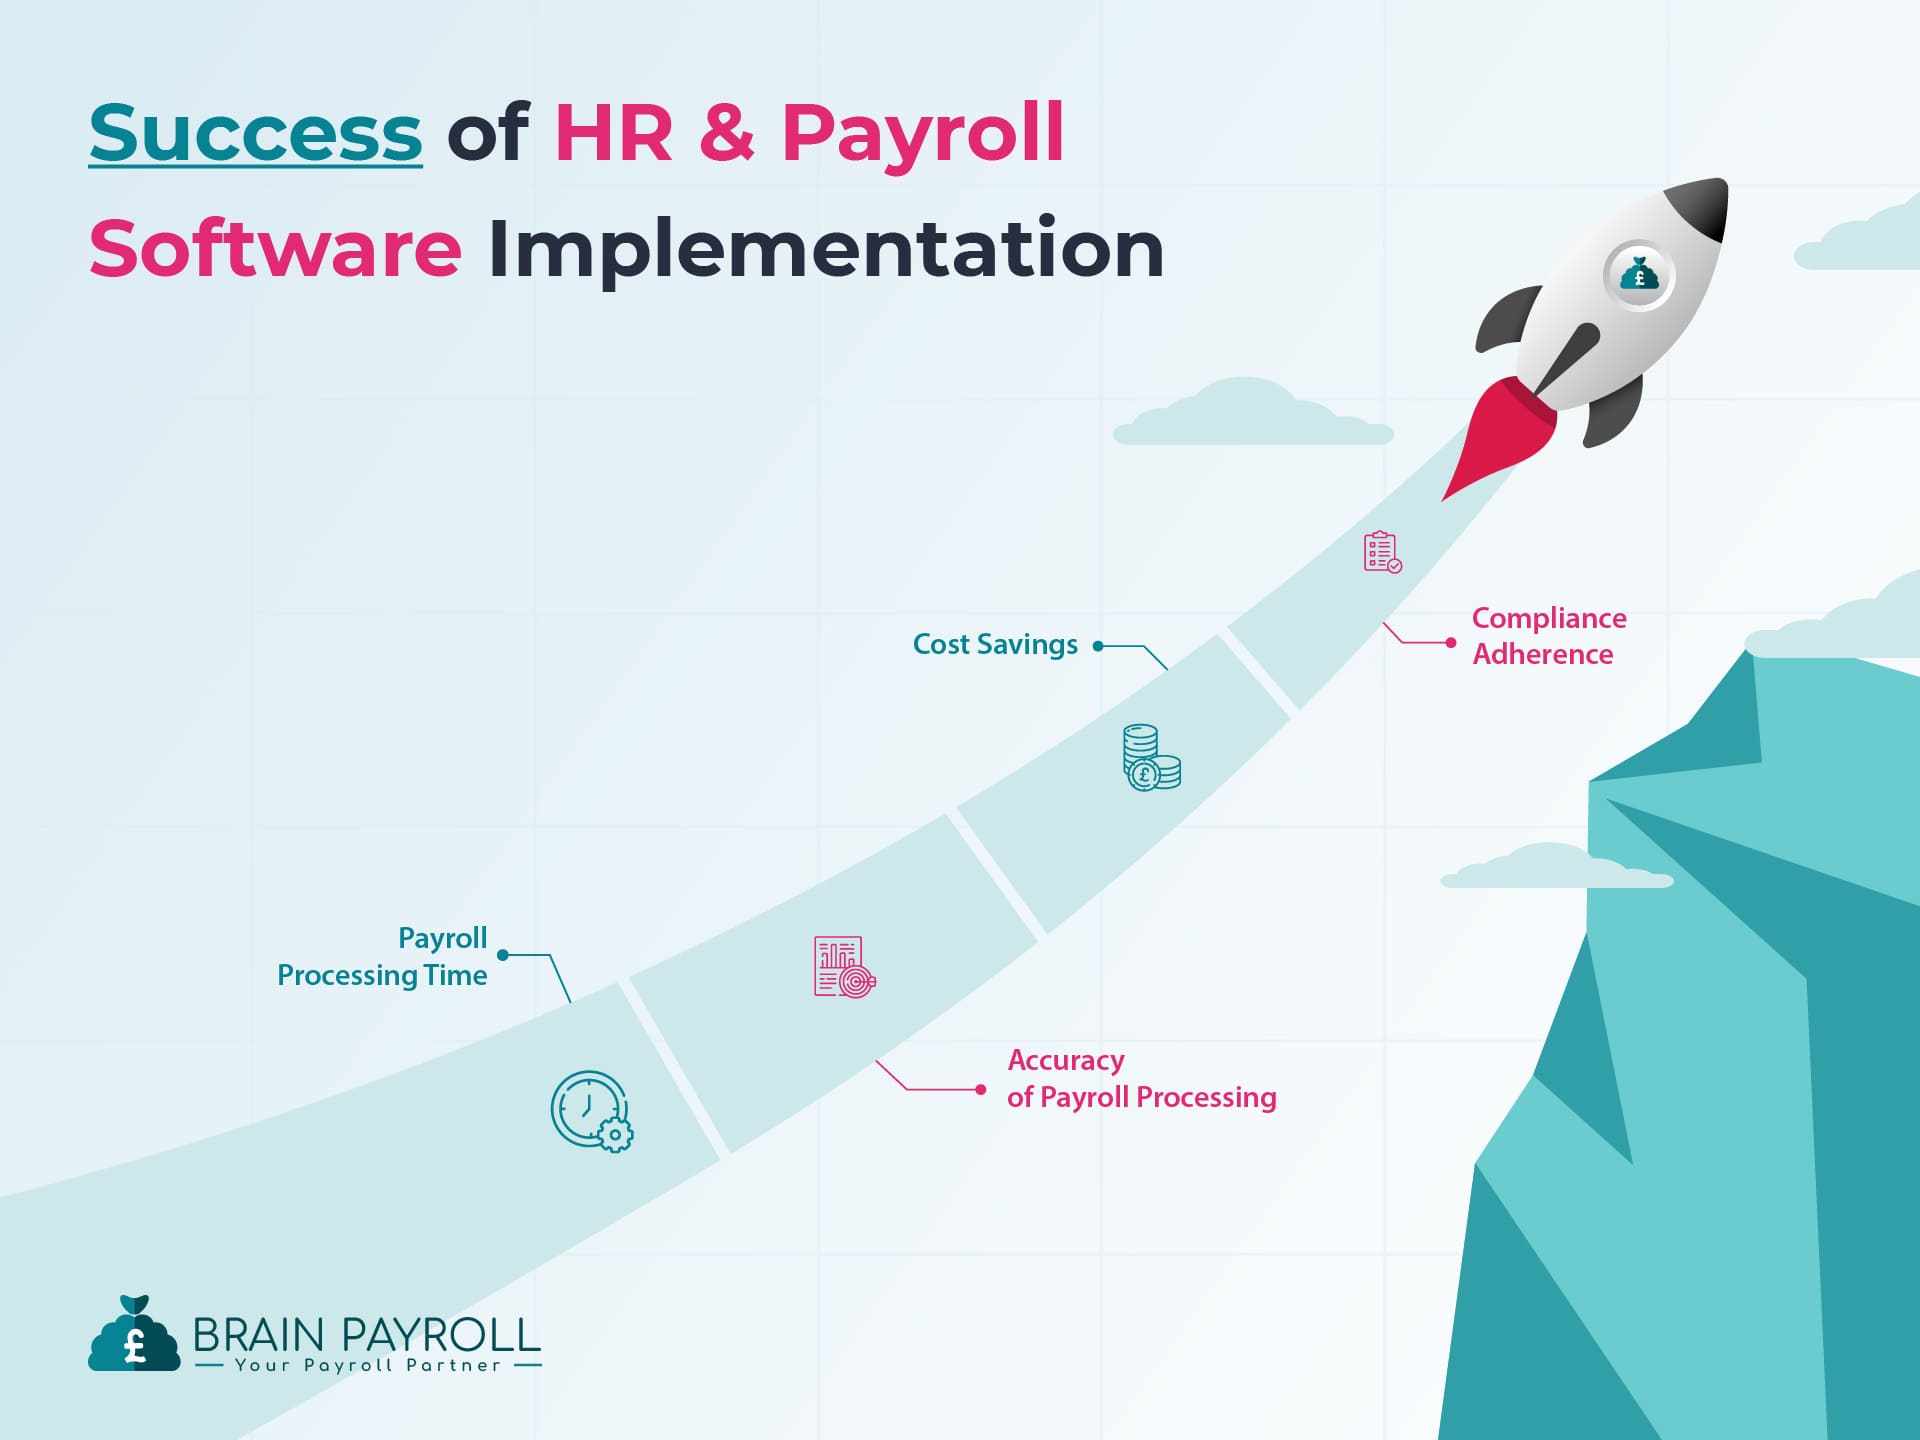 How to measure the success of HR and payroll software implementation